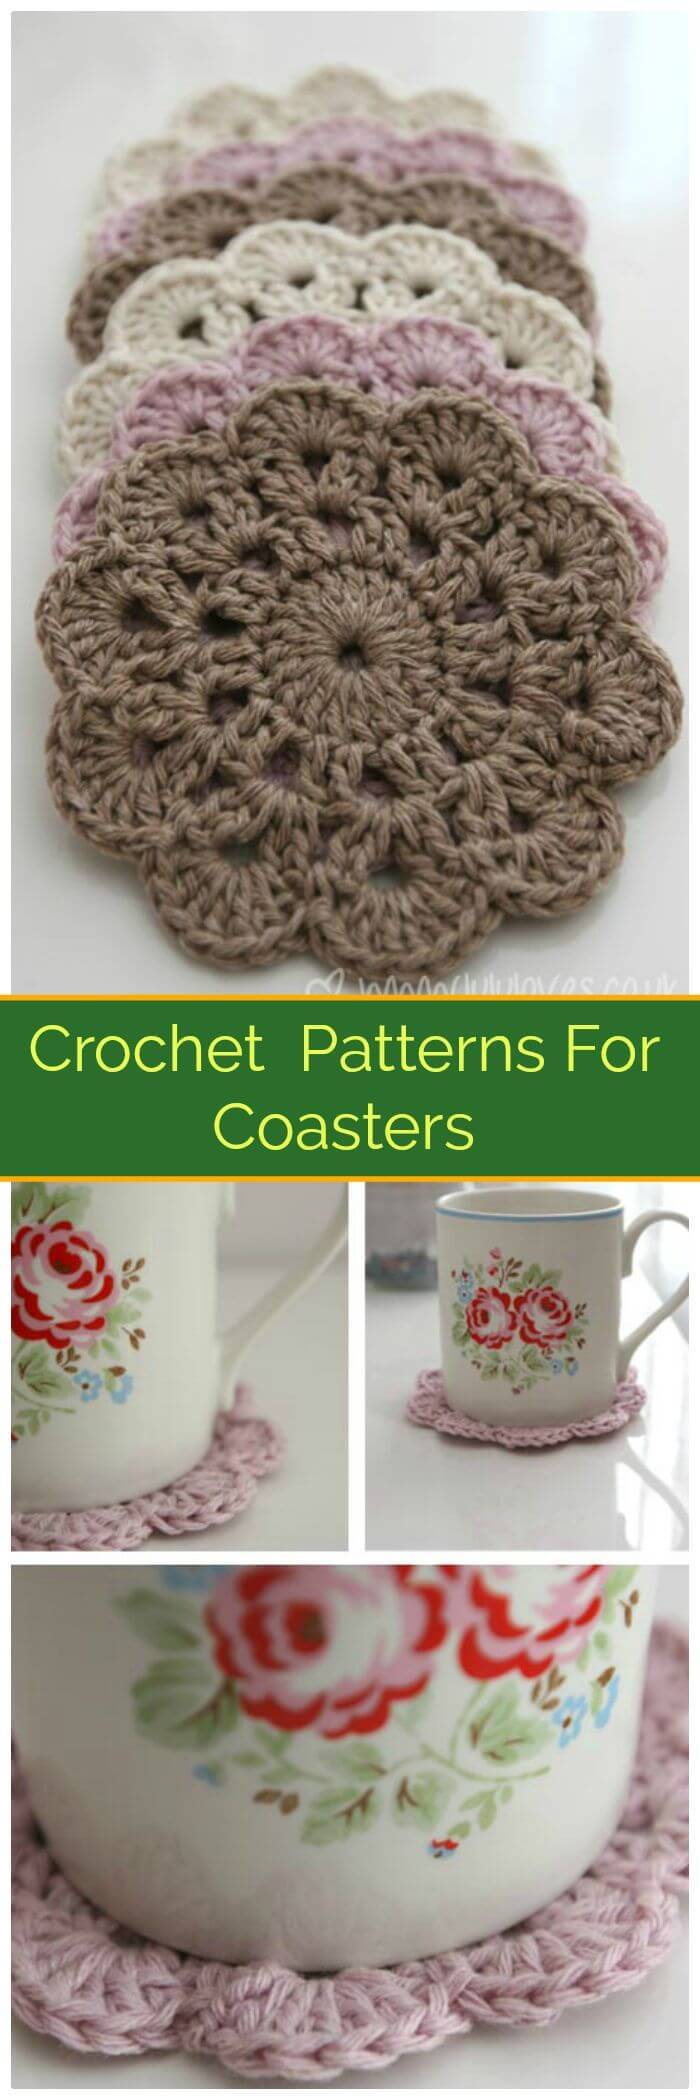 DIY Crochet Patterns For Coasters, How to crochet a coaster for beginners!